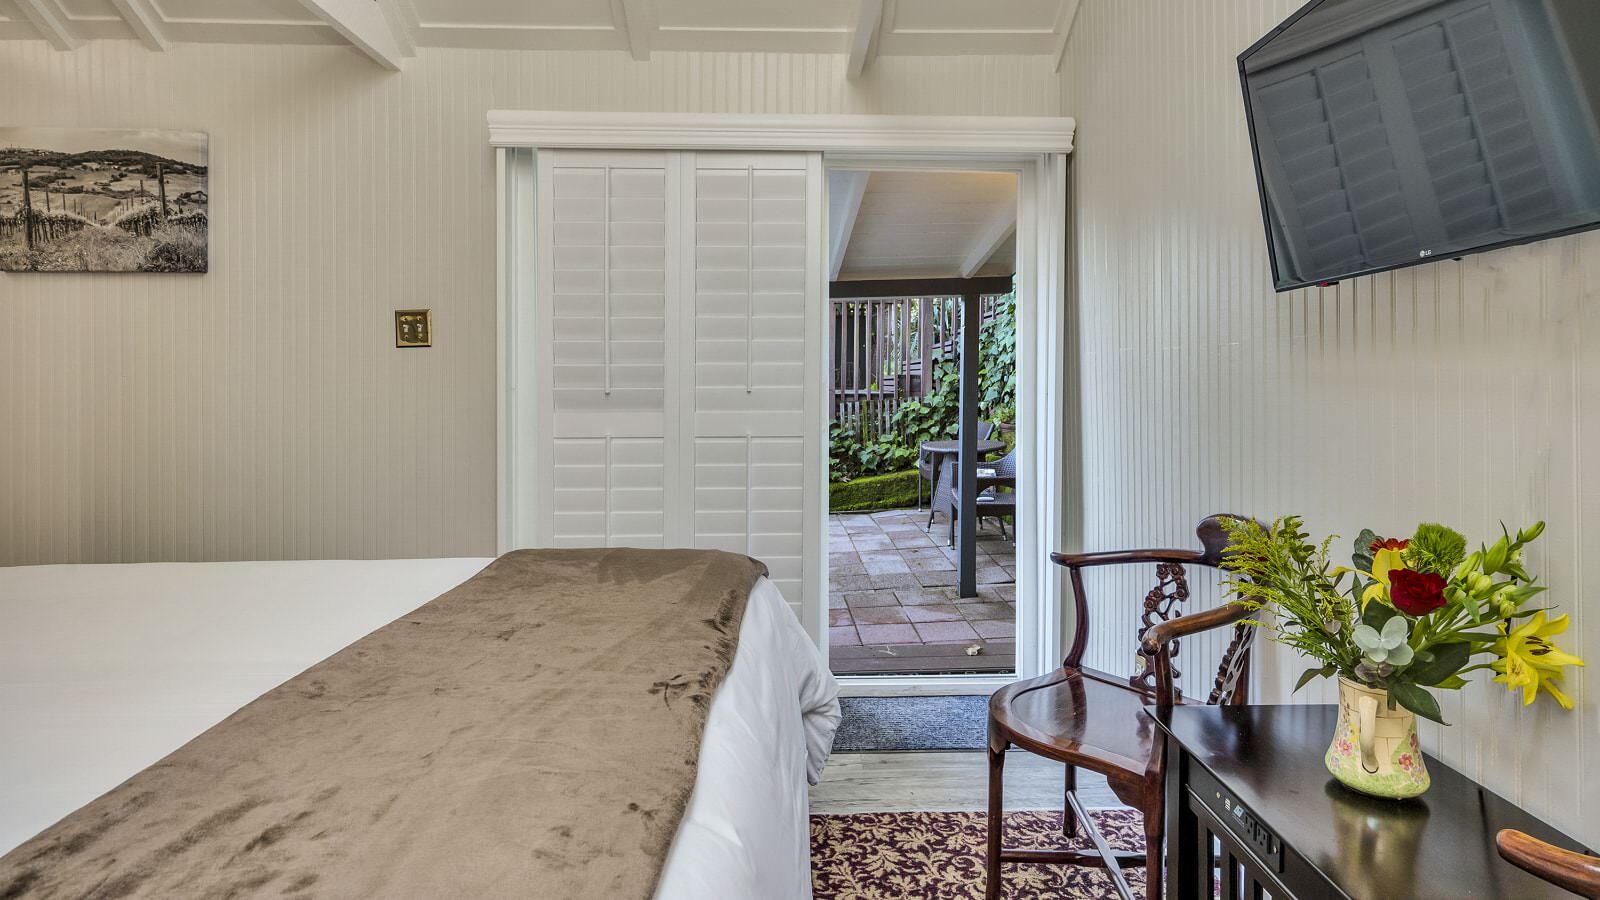 Bedroom with white walls, floral carpeting, white bedding, dark wooden table, and view out to back patio